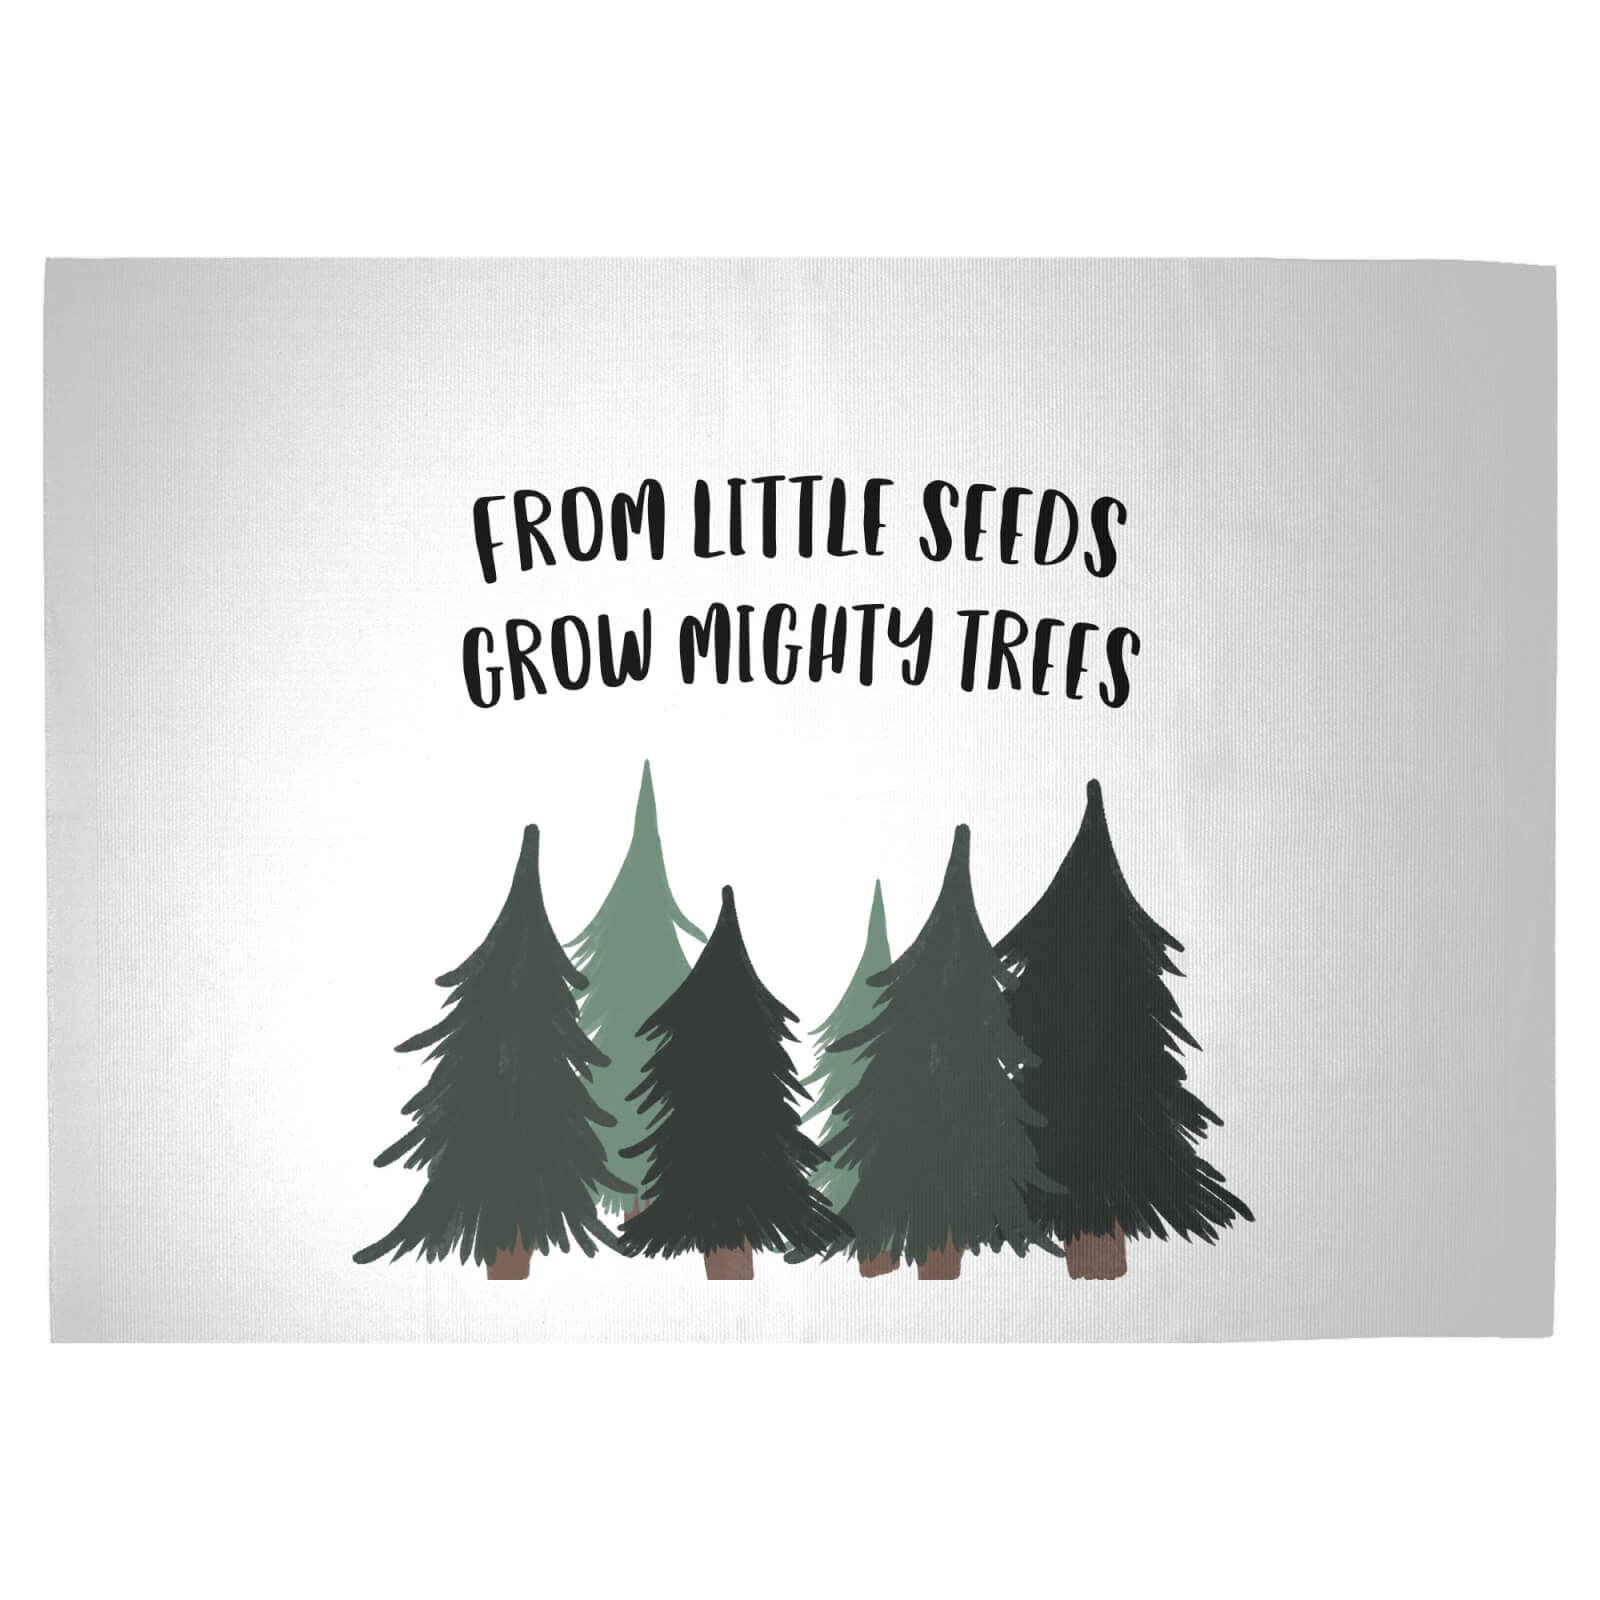 From Little Seeds Grow Mighty Trees Woven Rug - Large